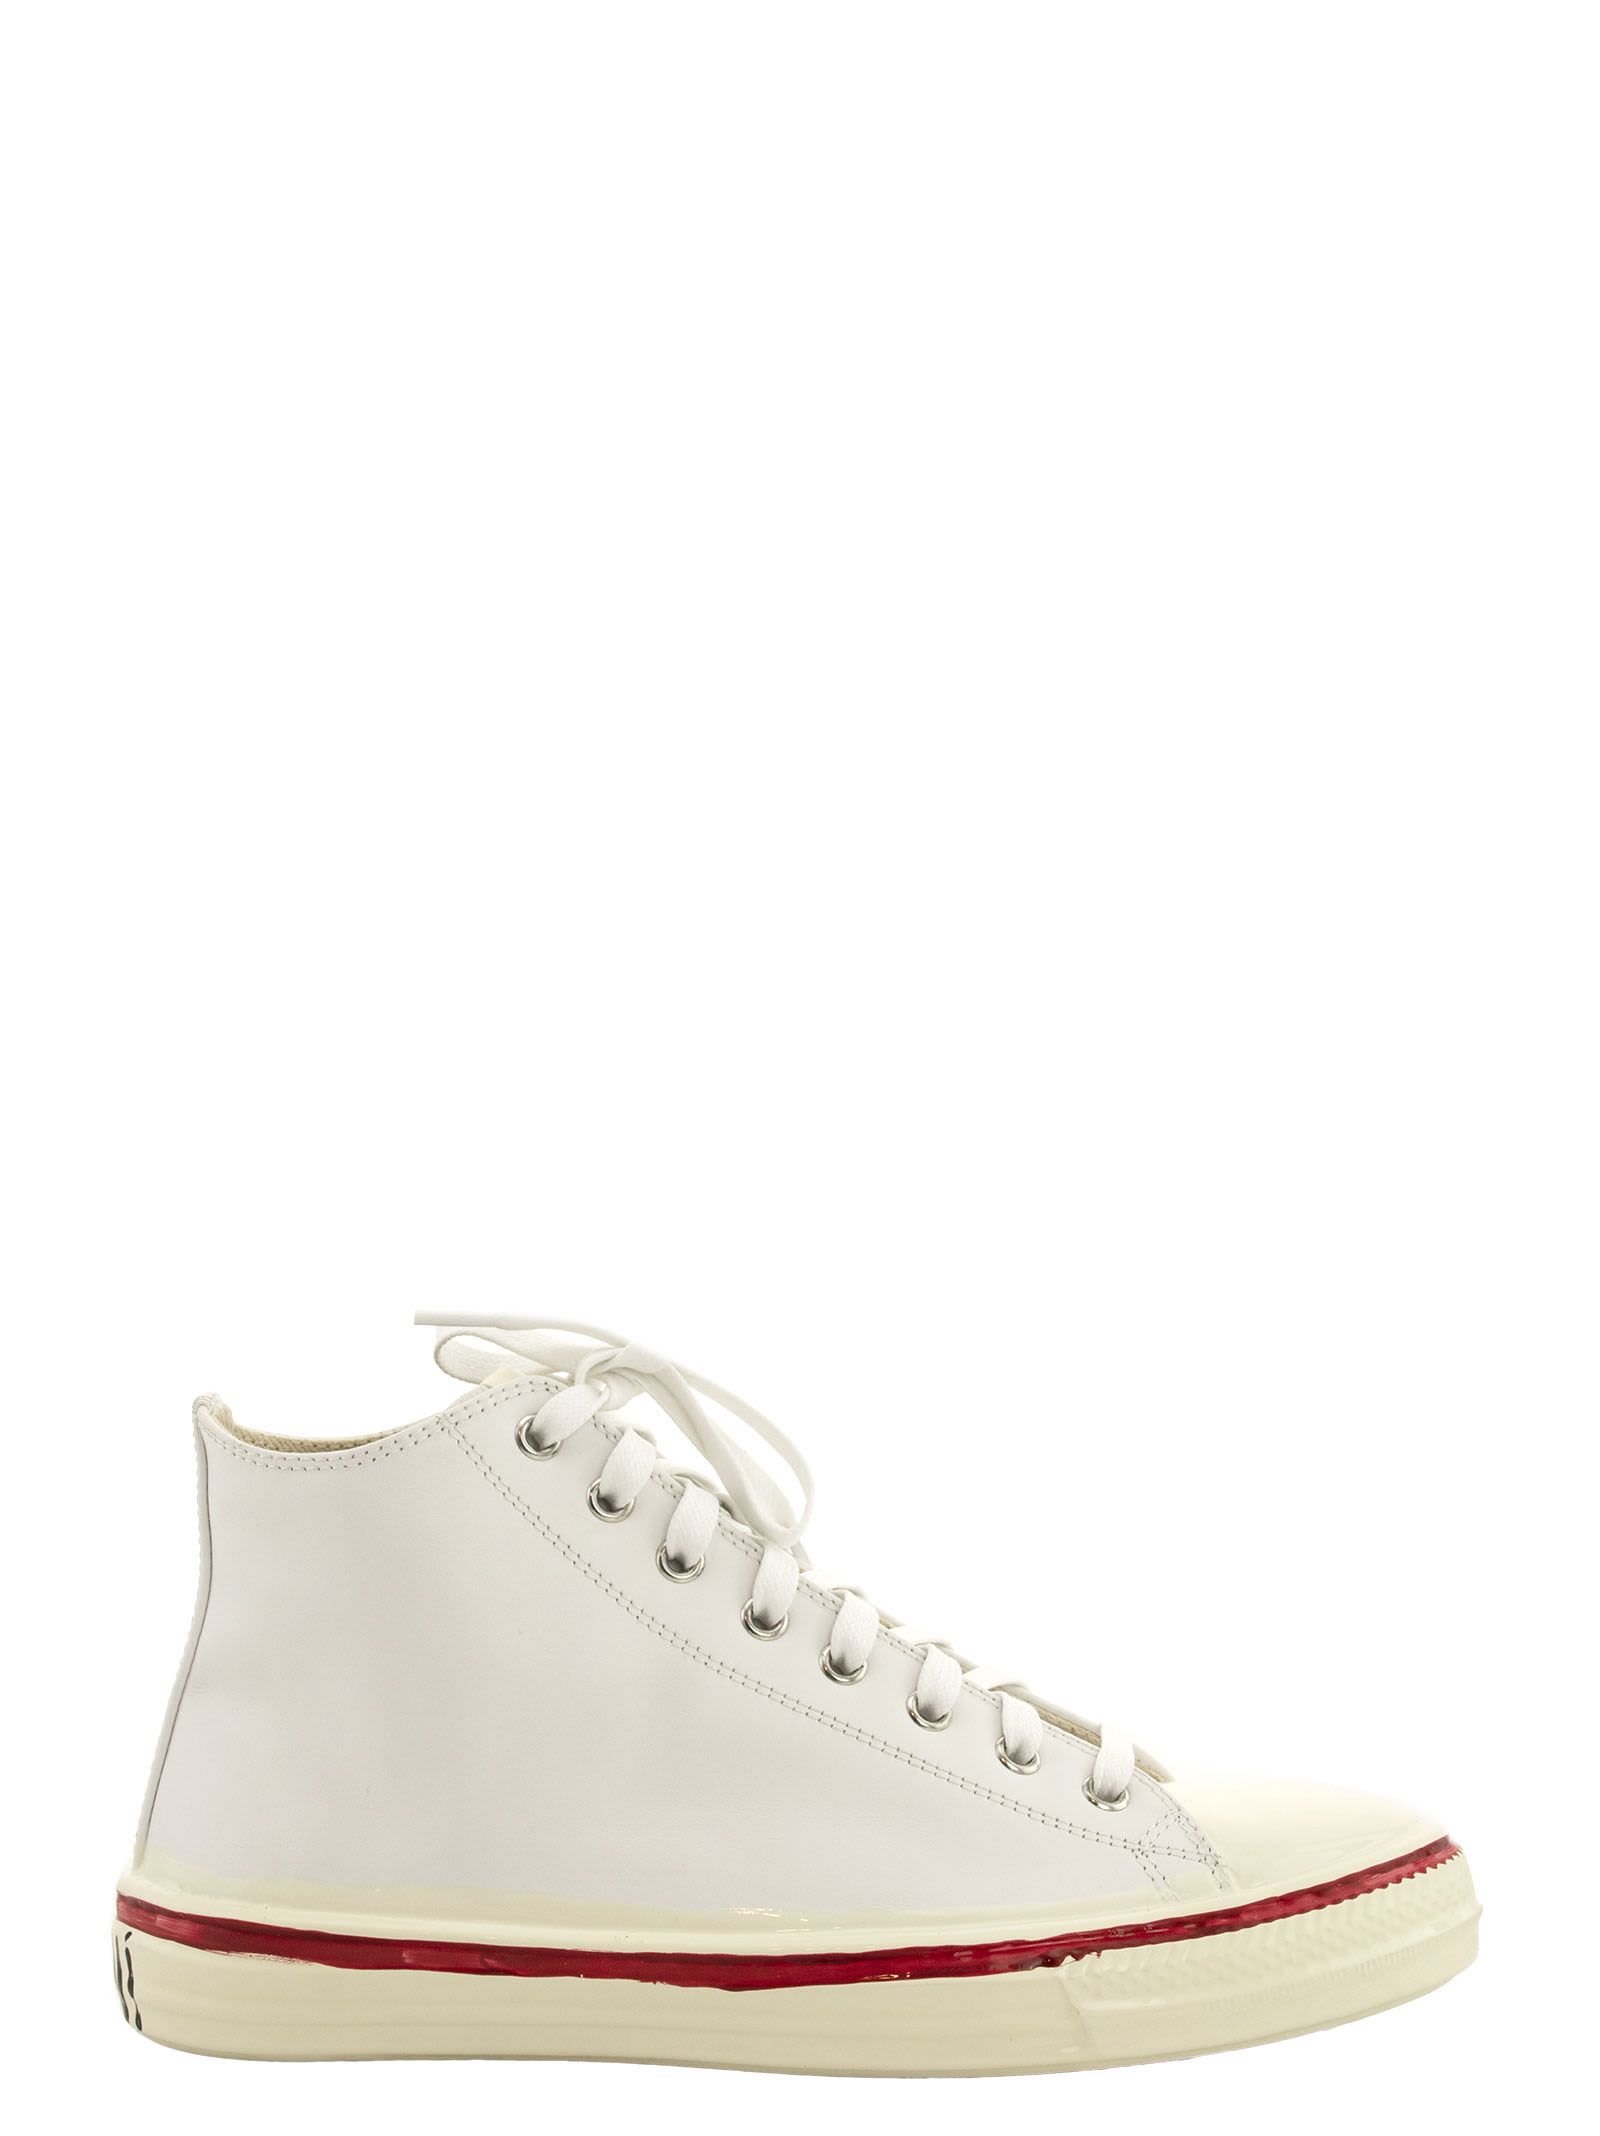 Photo of  Marni Graffiti White High-top Sneaker In Leather With Partial Rubber Coating- shop Marni Sneakers online sales